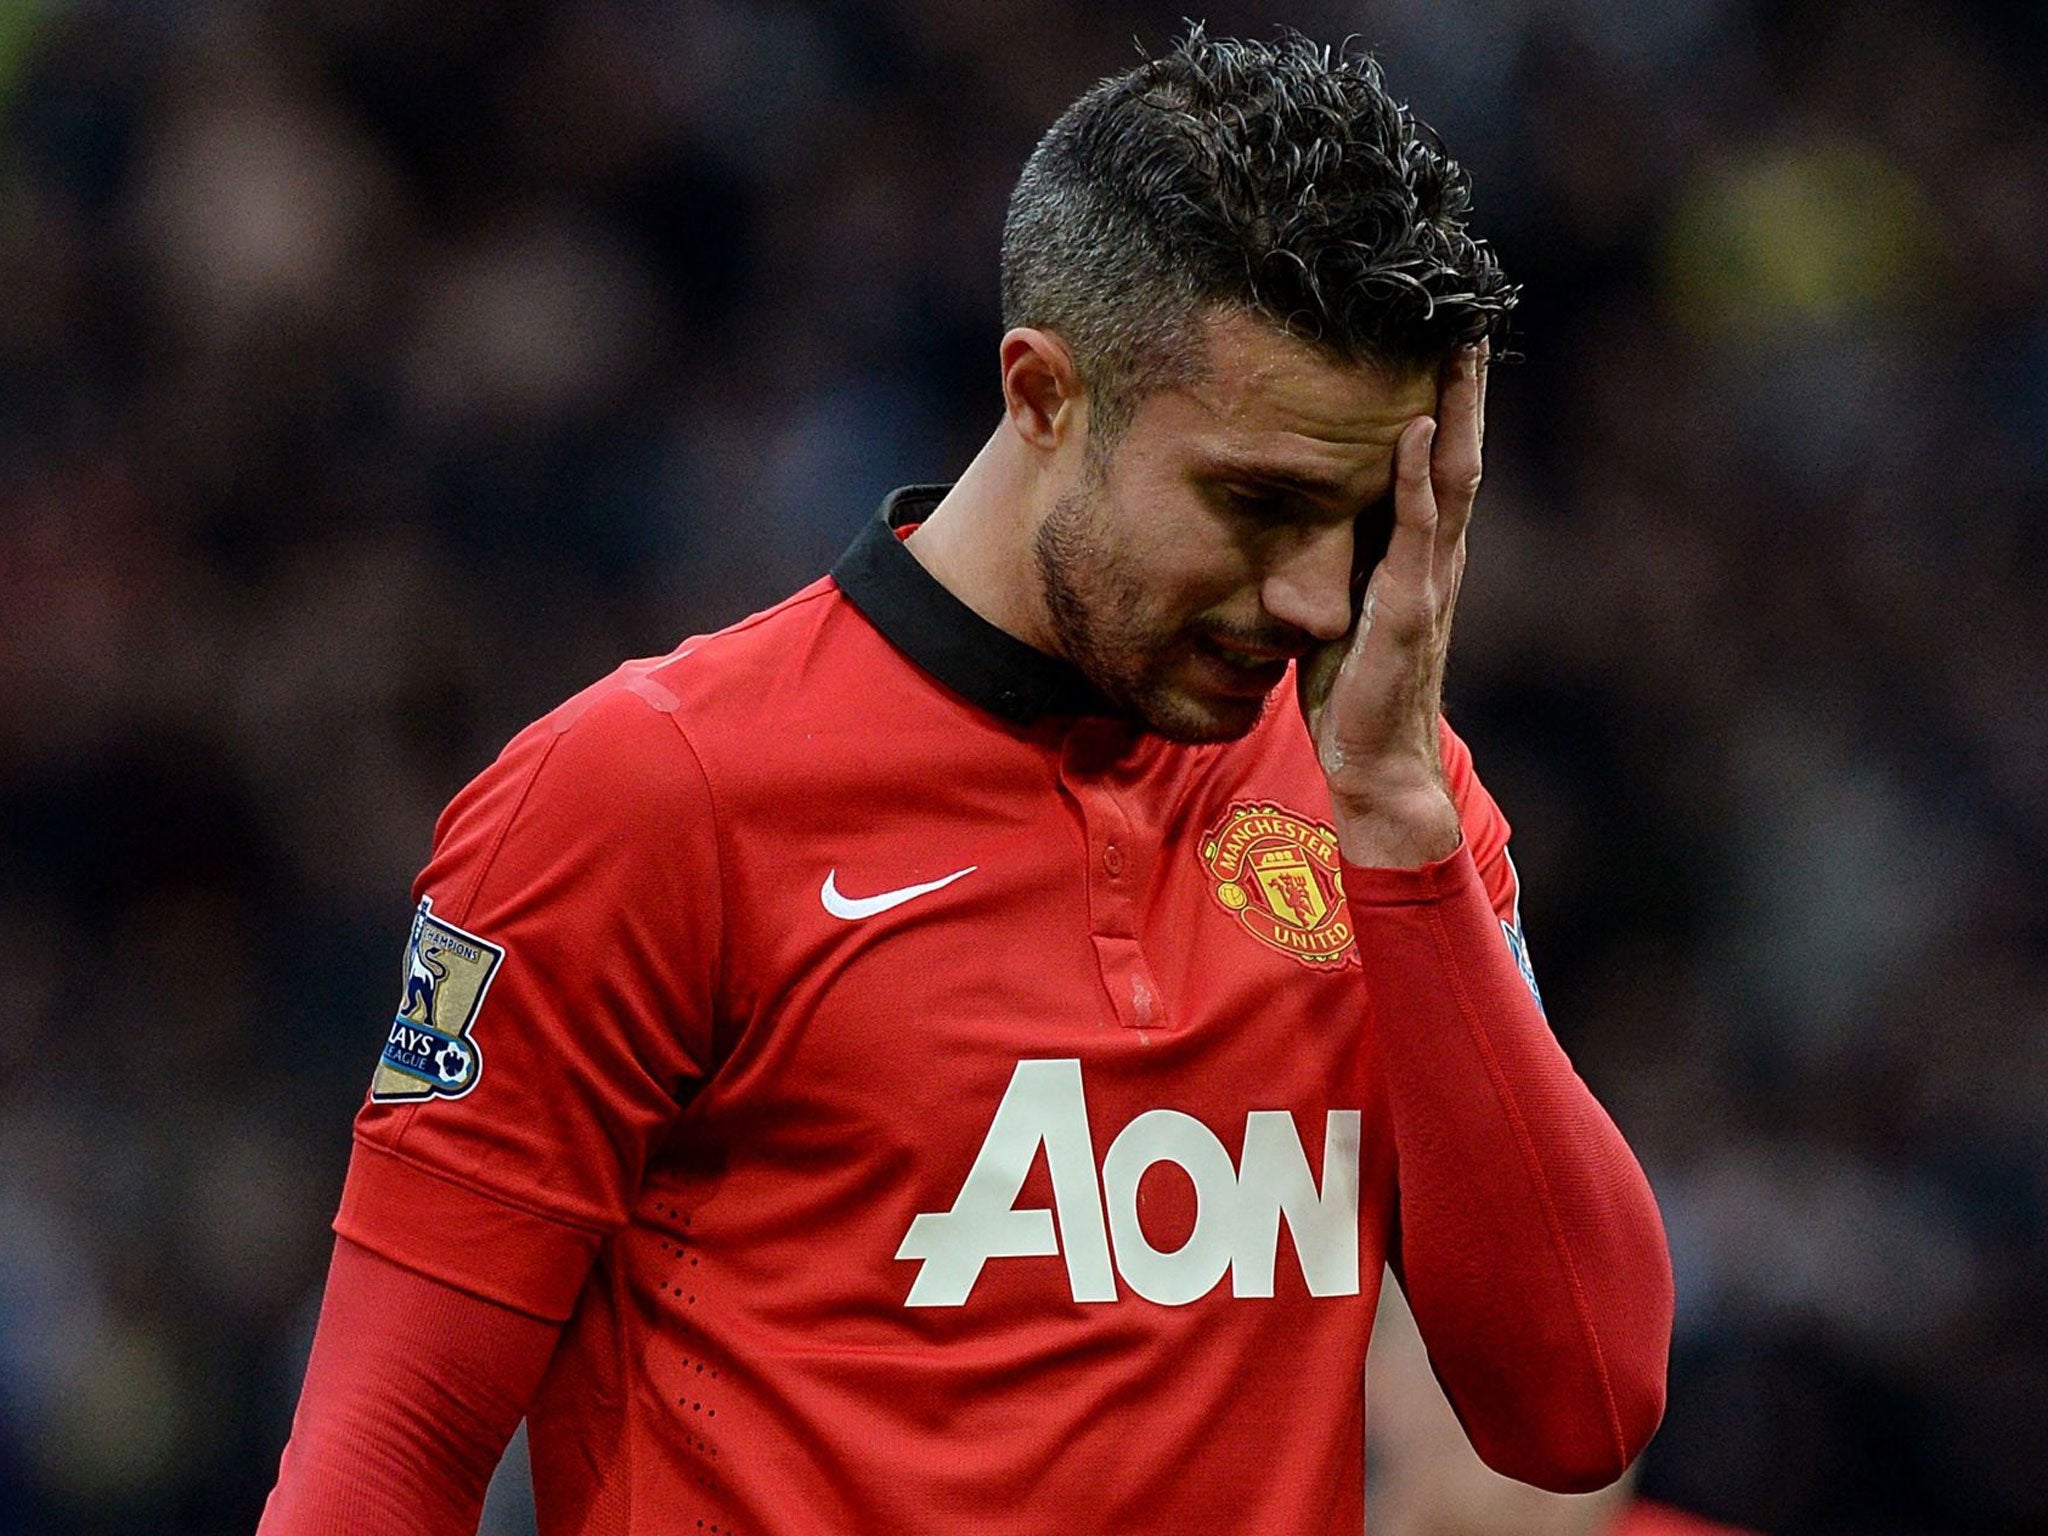 Manchester United striker Robin van Persie has been ruled out for a month with a thigh injury